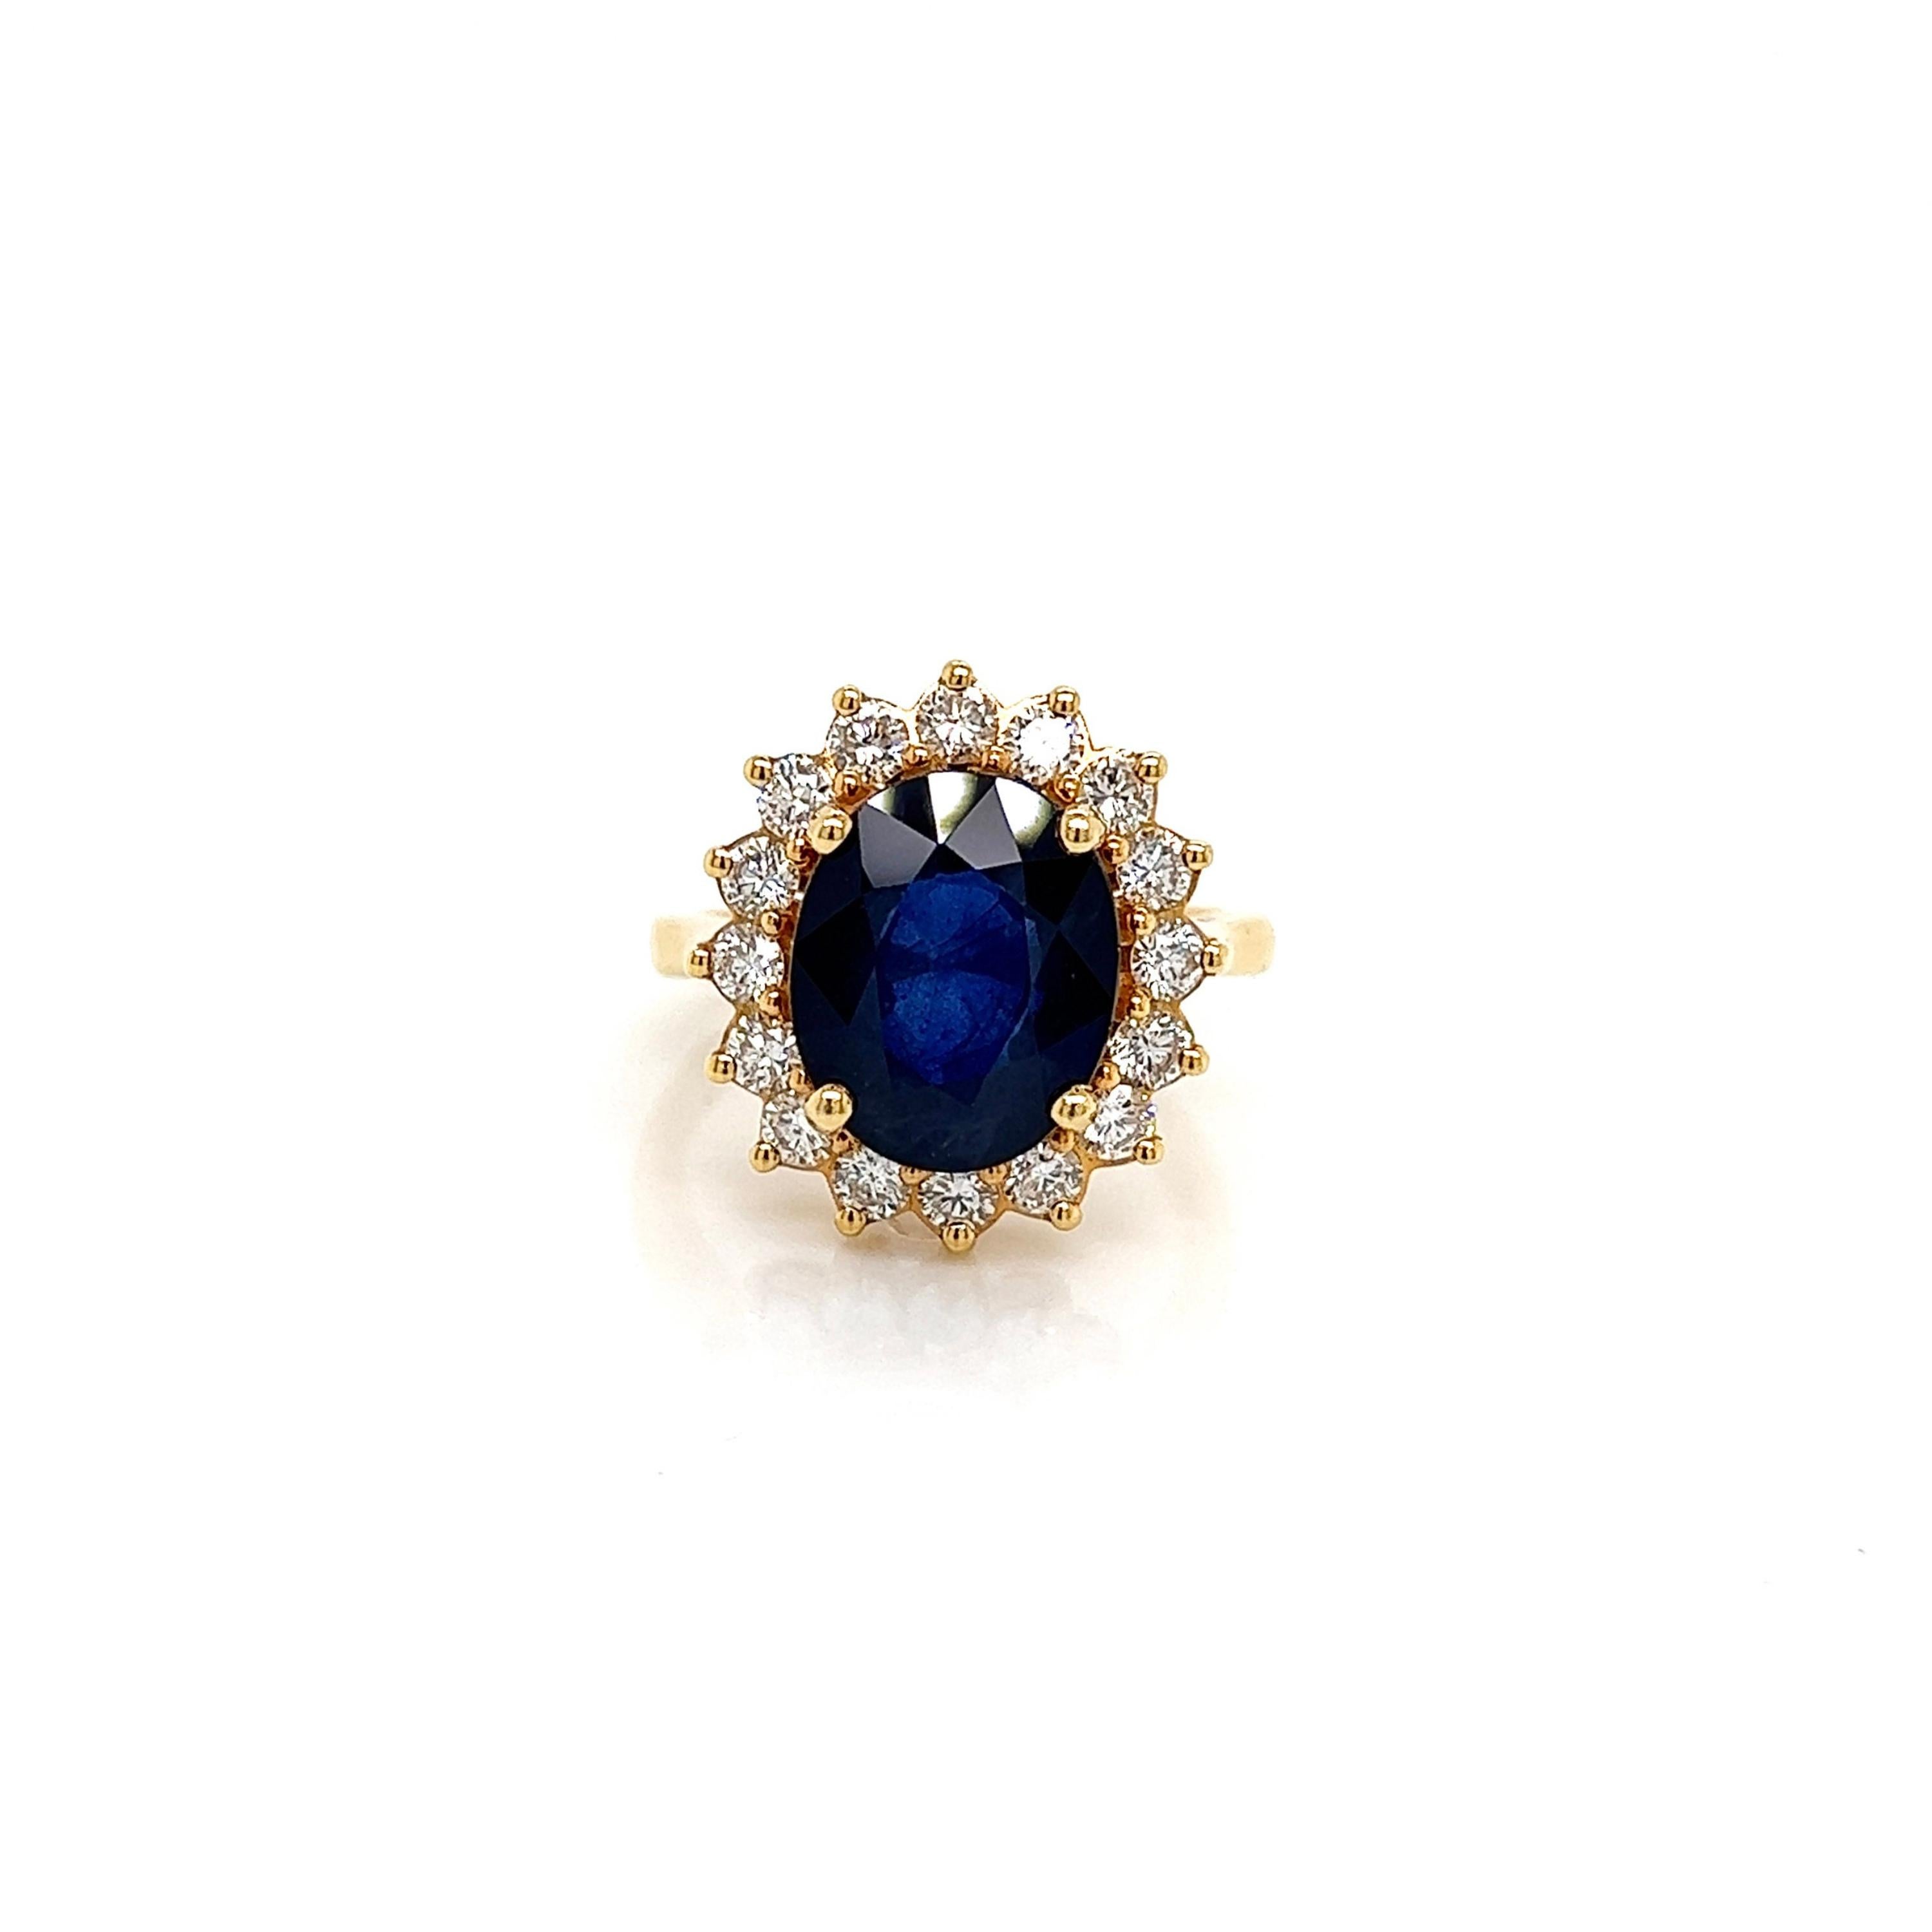 4.63 Carat Halo Blue Ceylon Sapphire Diamond Ring Floral Sapphire Ring in Gold For Sale 1